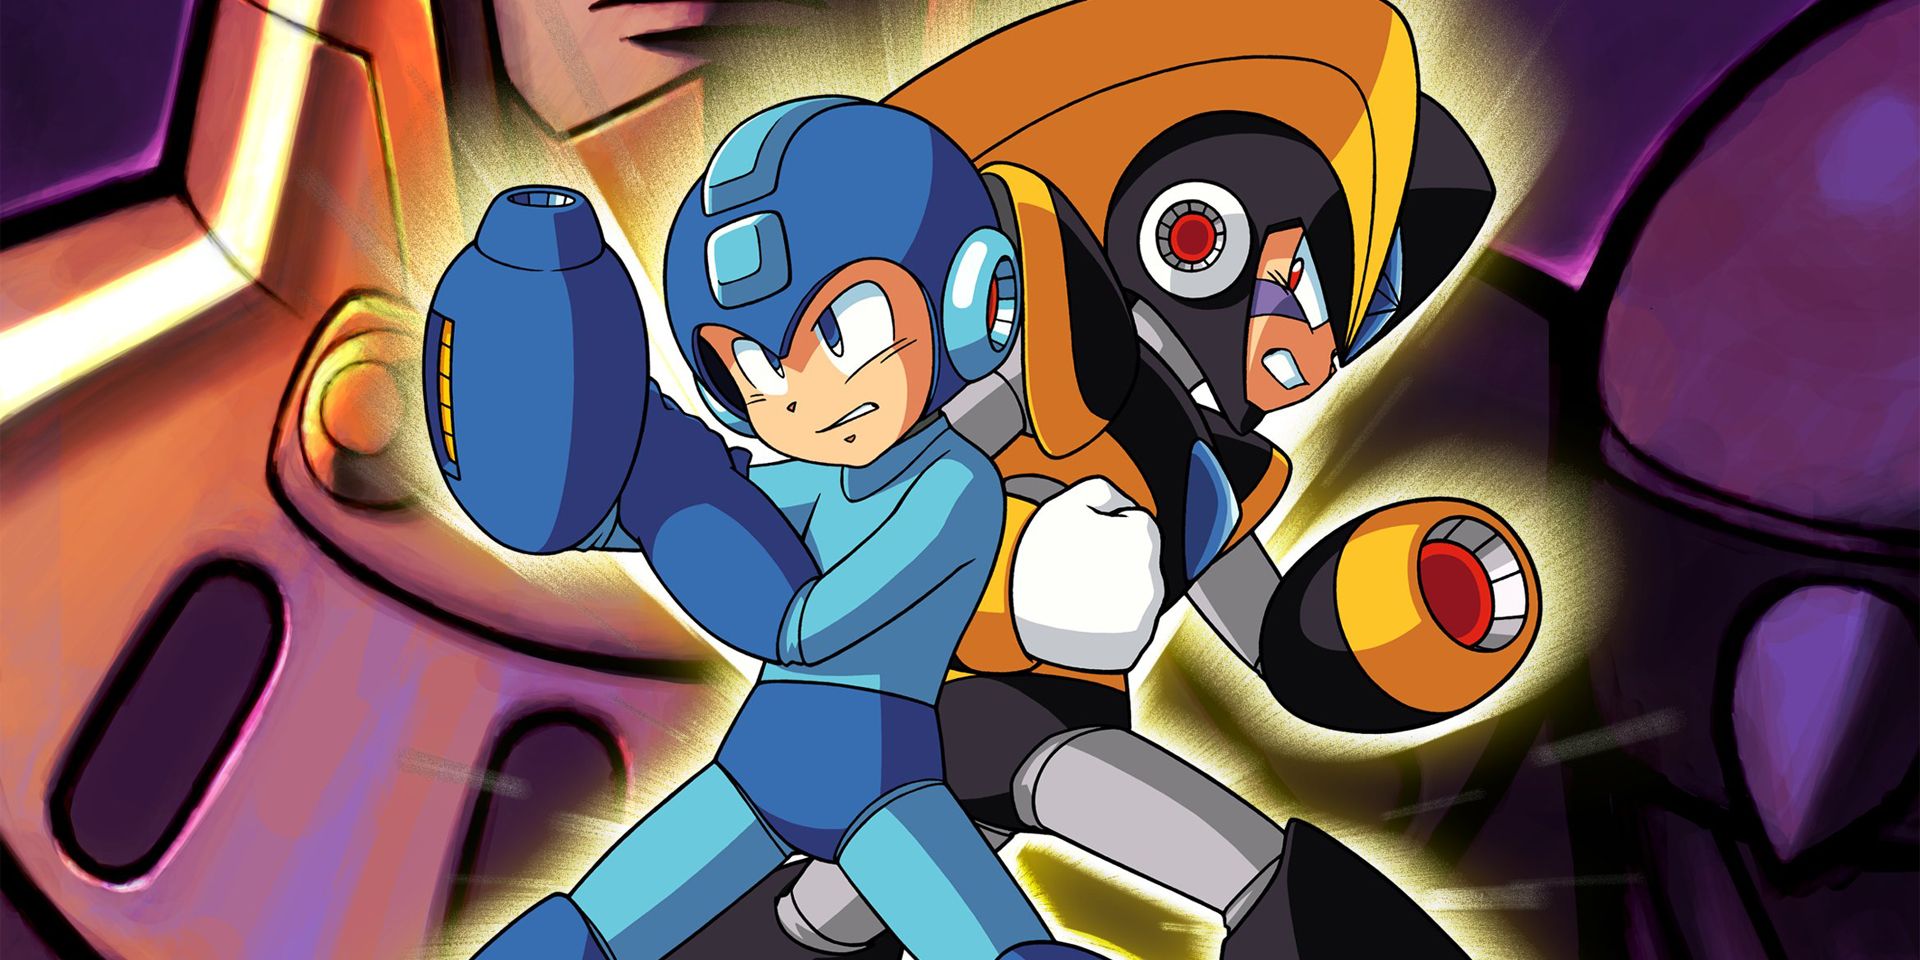 Megaman and Bass team up against King.